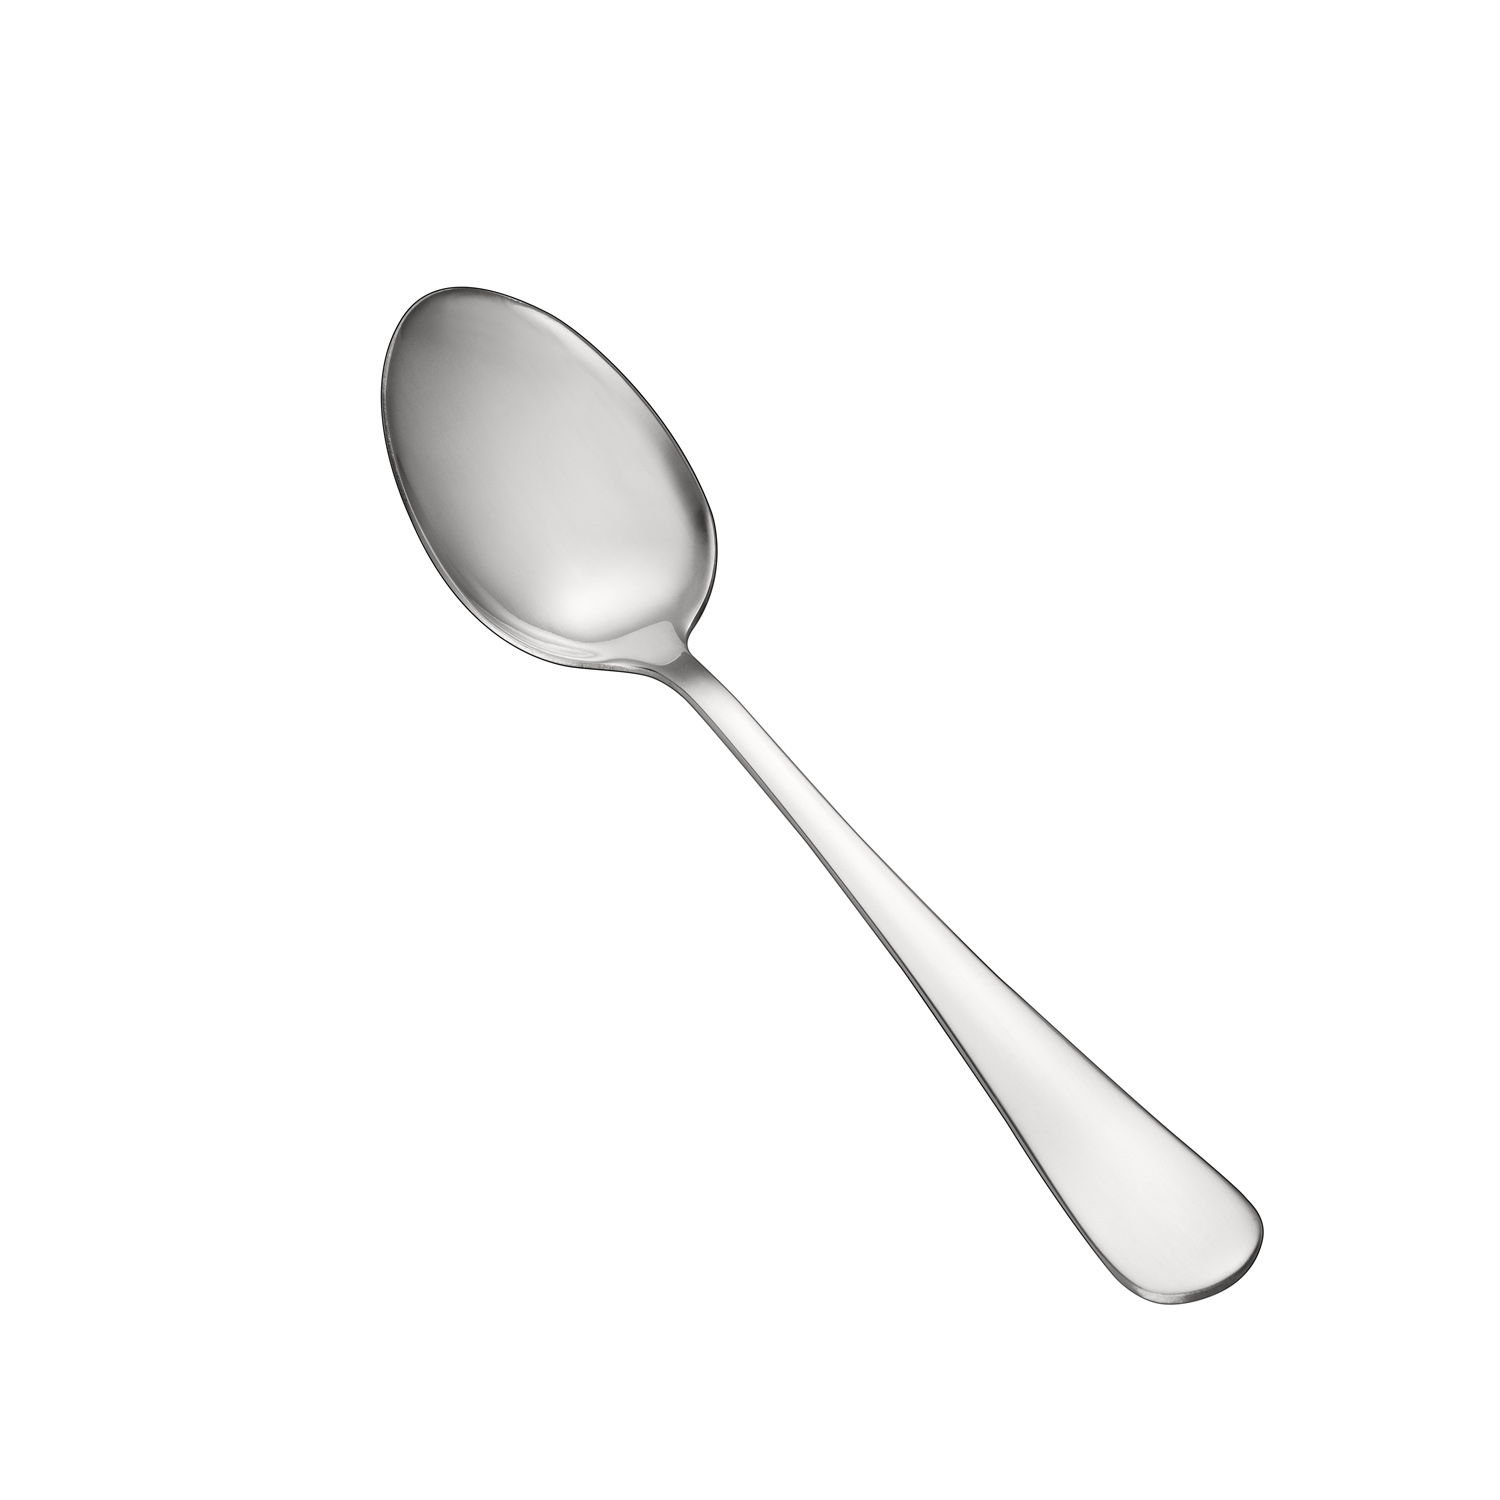 CAC China 3003-03 Continental Dinner Spoon, Heavyweight 18/0, 7"